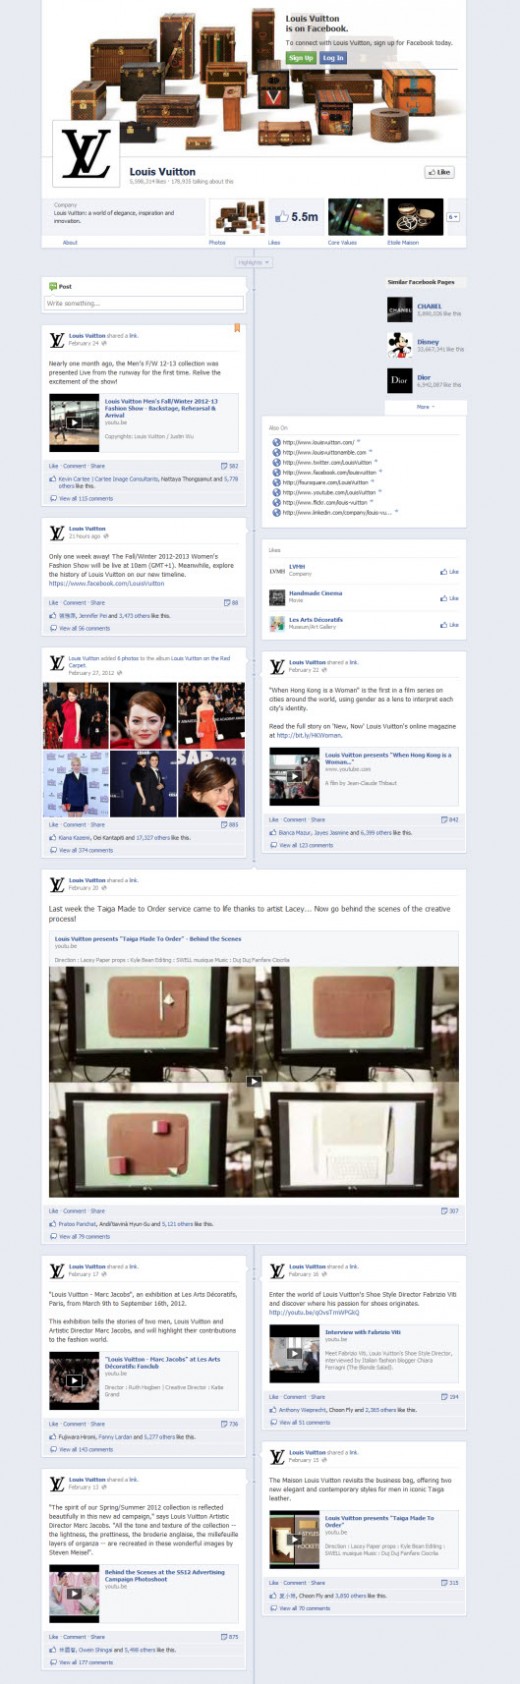 5 Facebook Timelines from Trendsetting Fashion Pages | Signature9